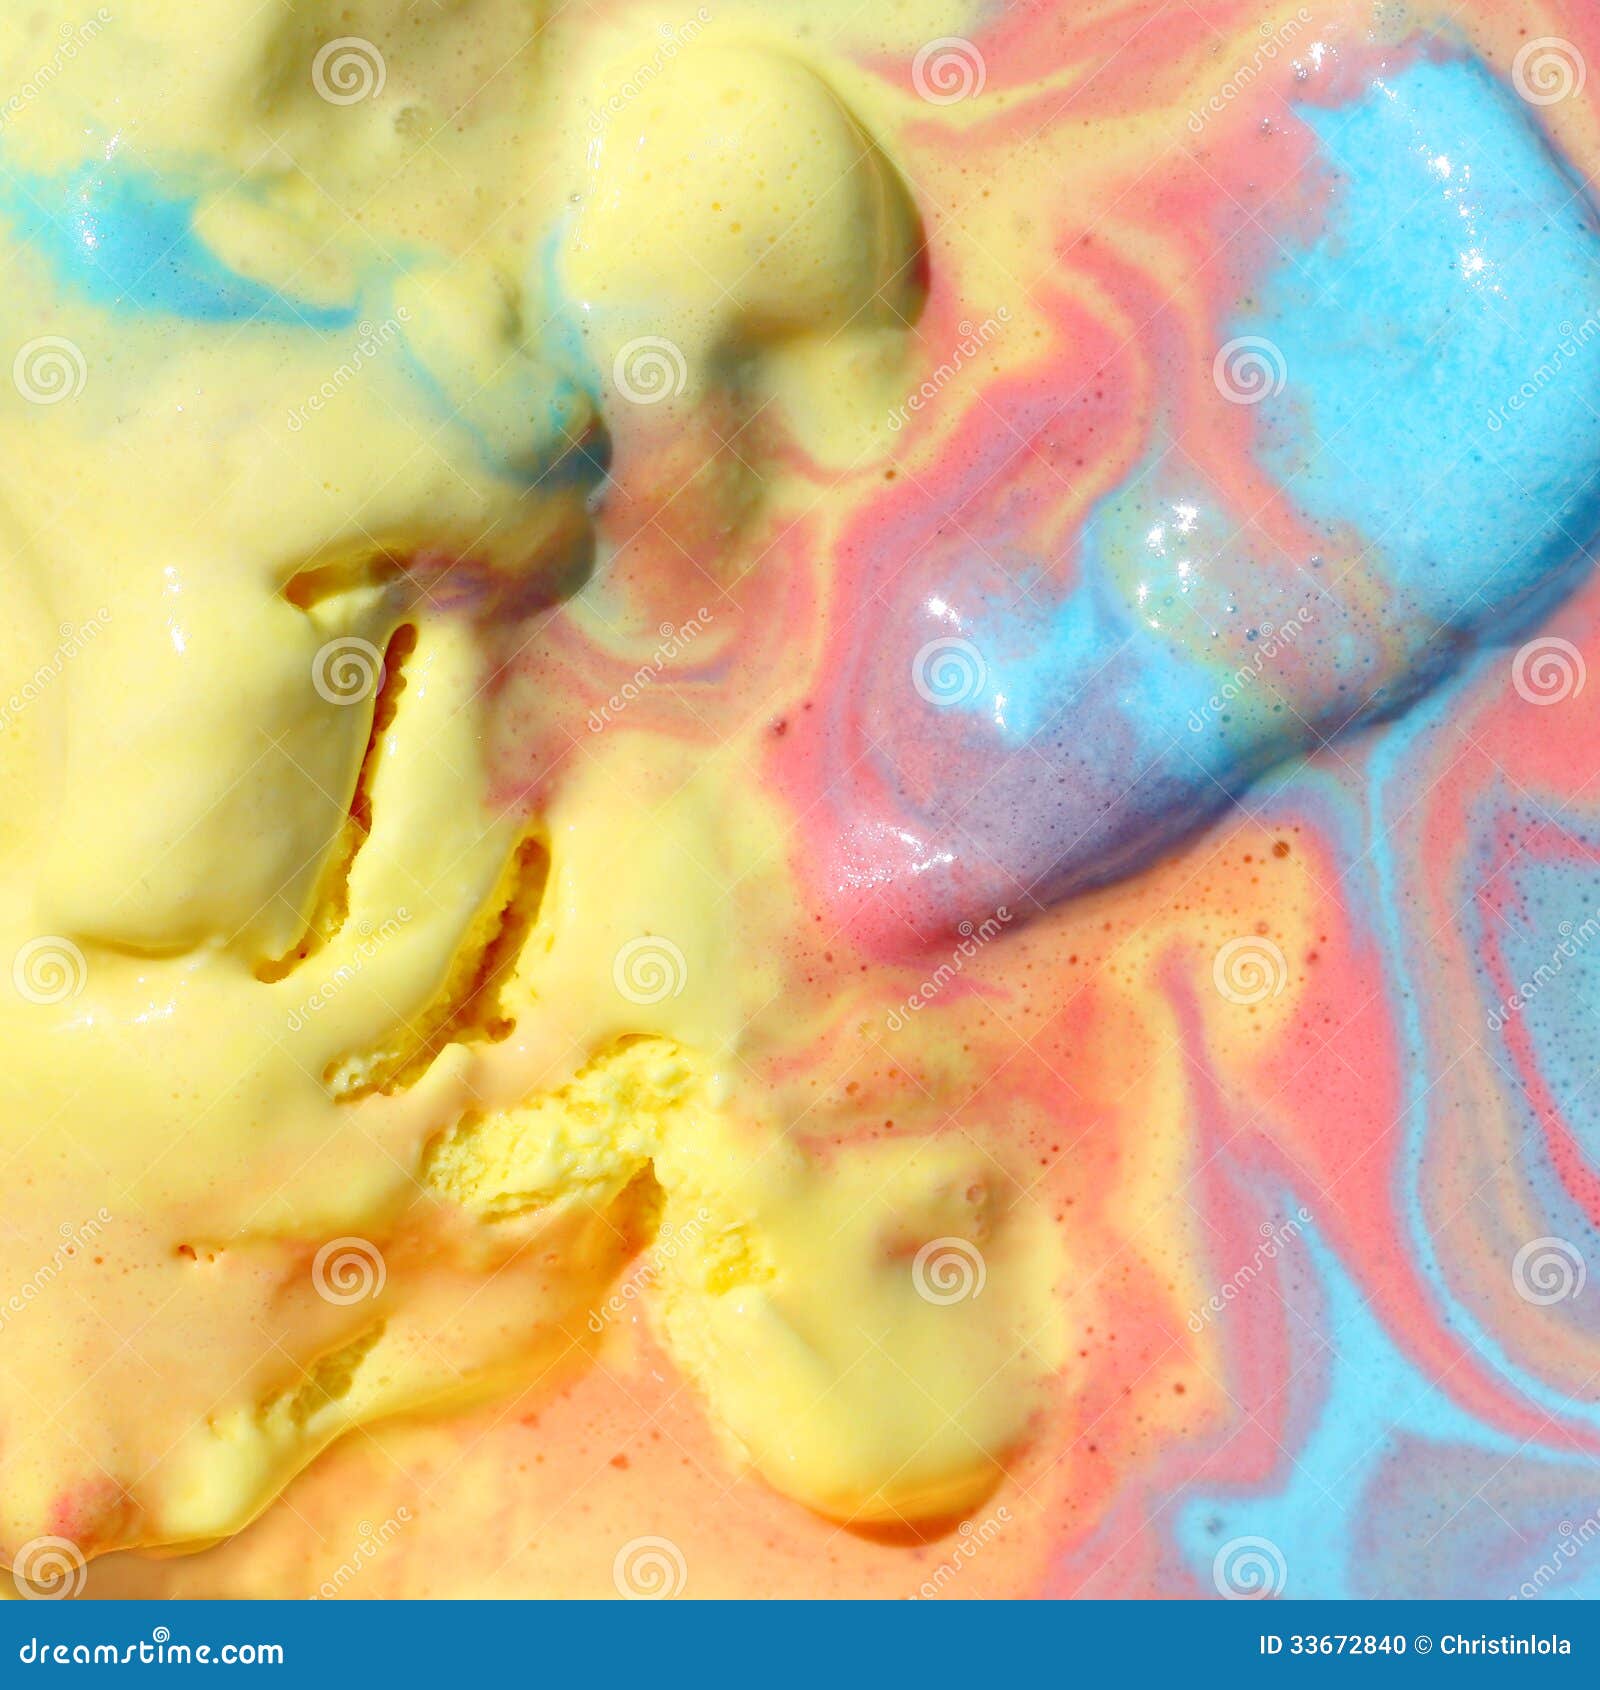 melted-ice-cream-square-background-close-up-pink-blue-yellow-rainbow-sorbet-hot-summer-day-33672840.jpg